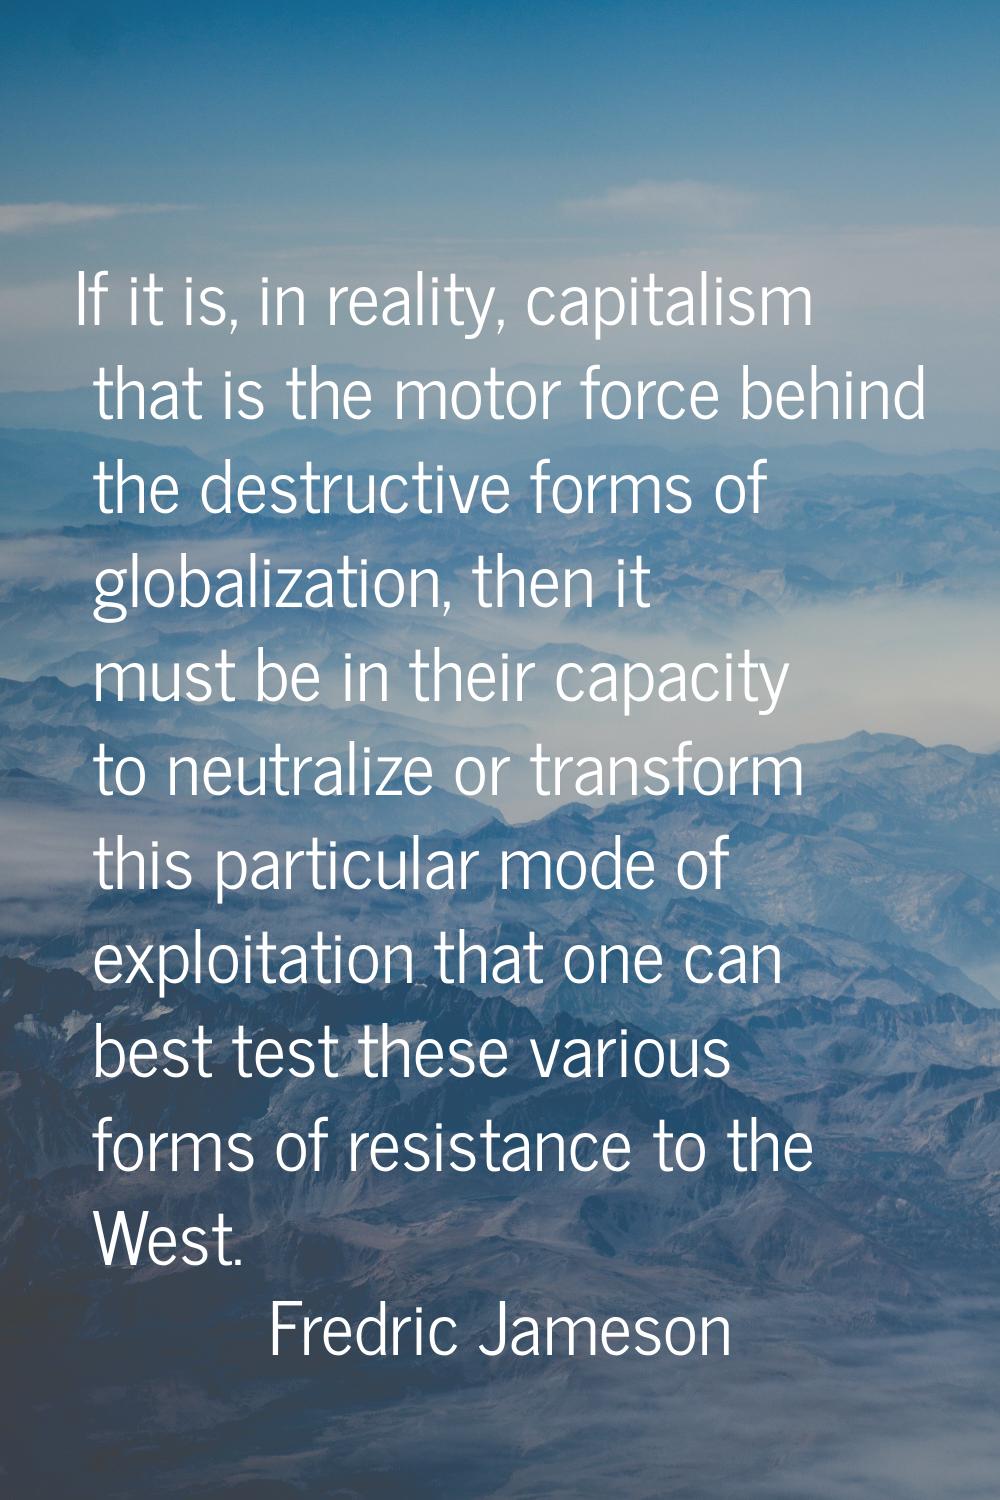 If it is, in reality, capitalism that is the motor force behind the destructive forms of globalizat